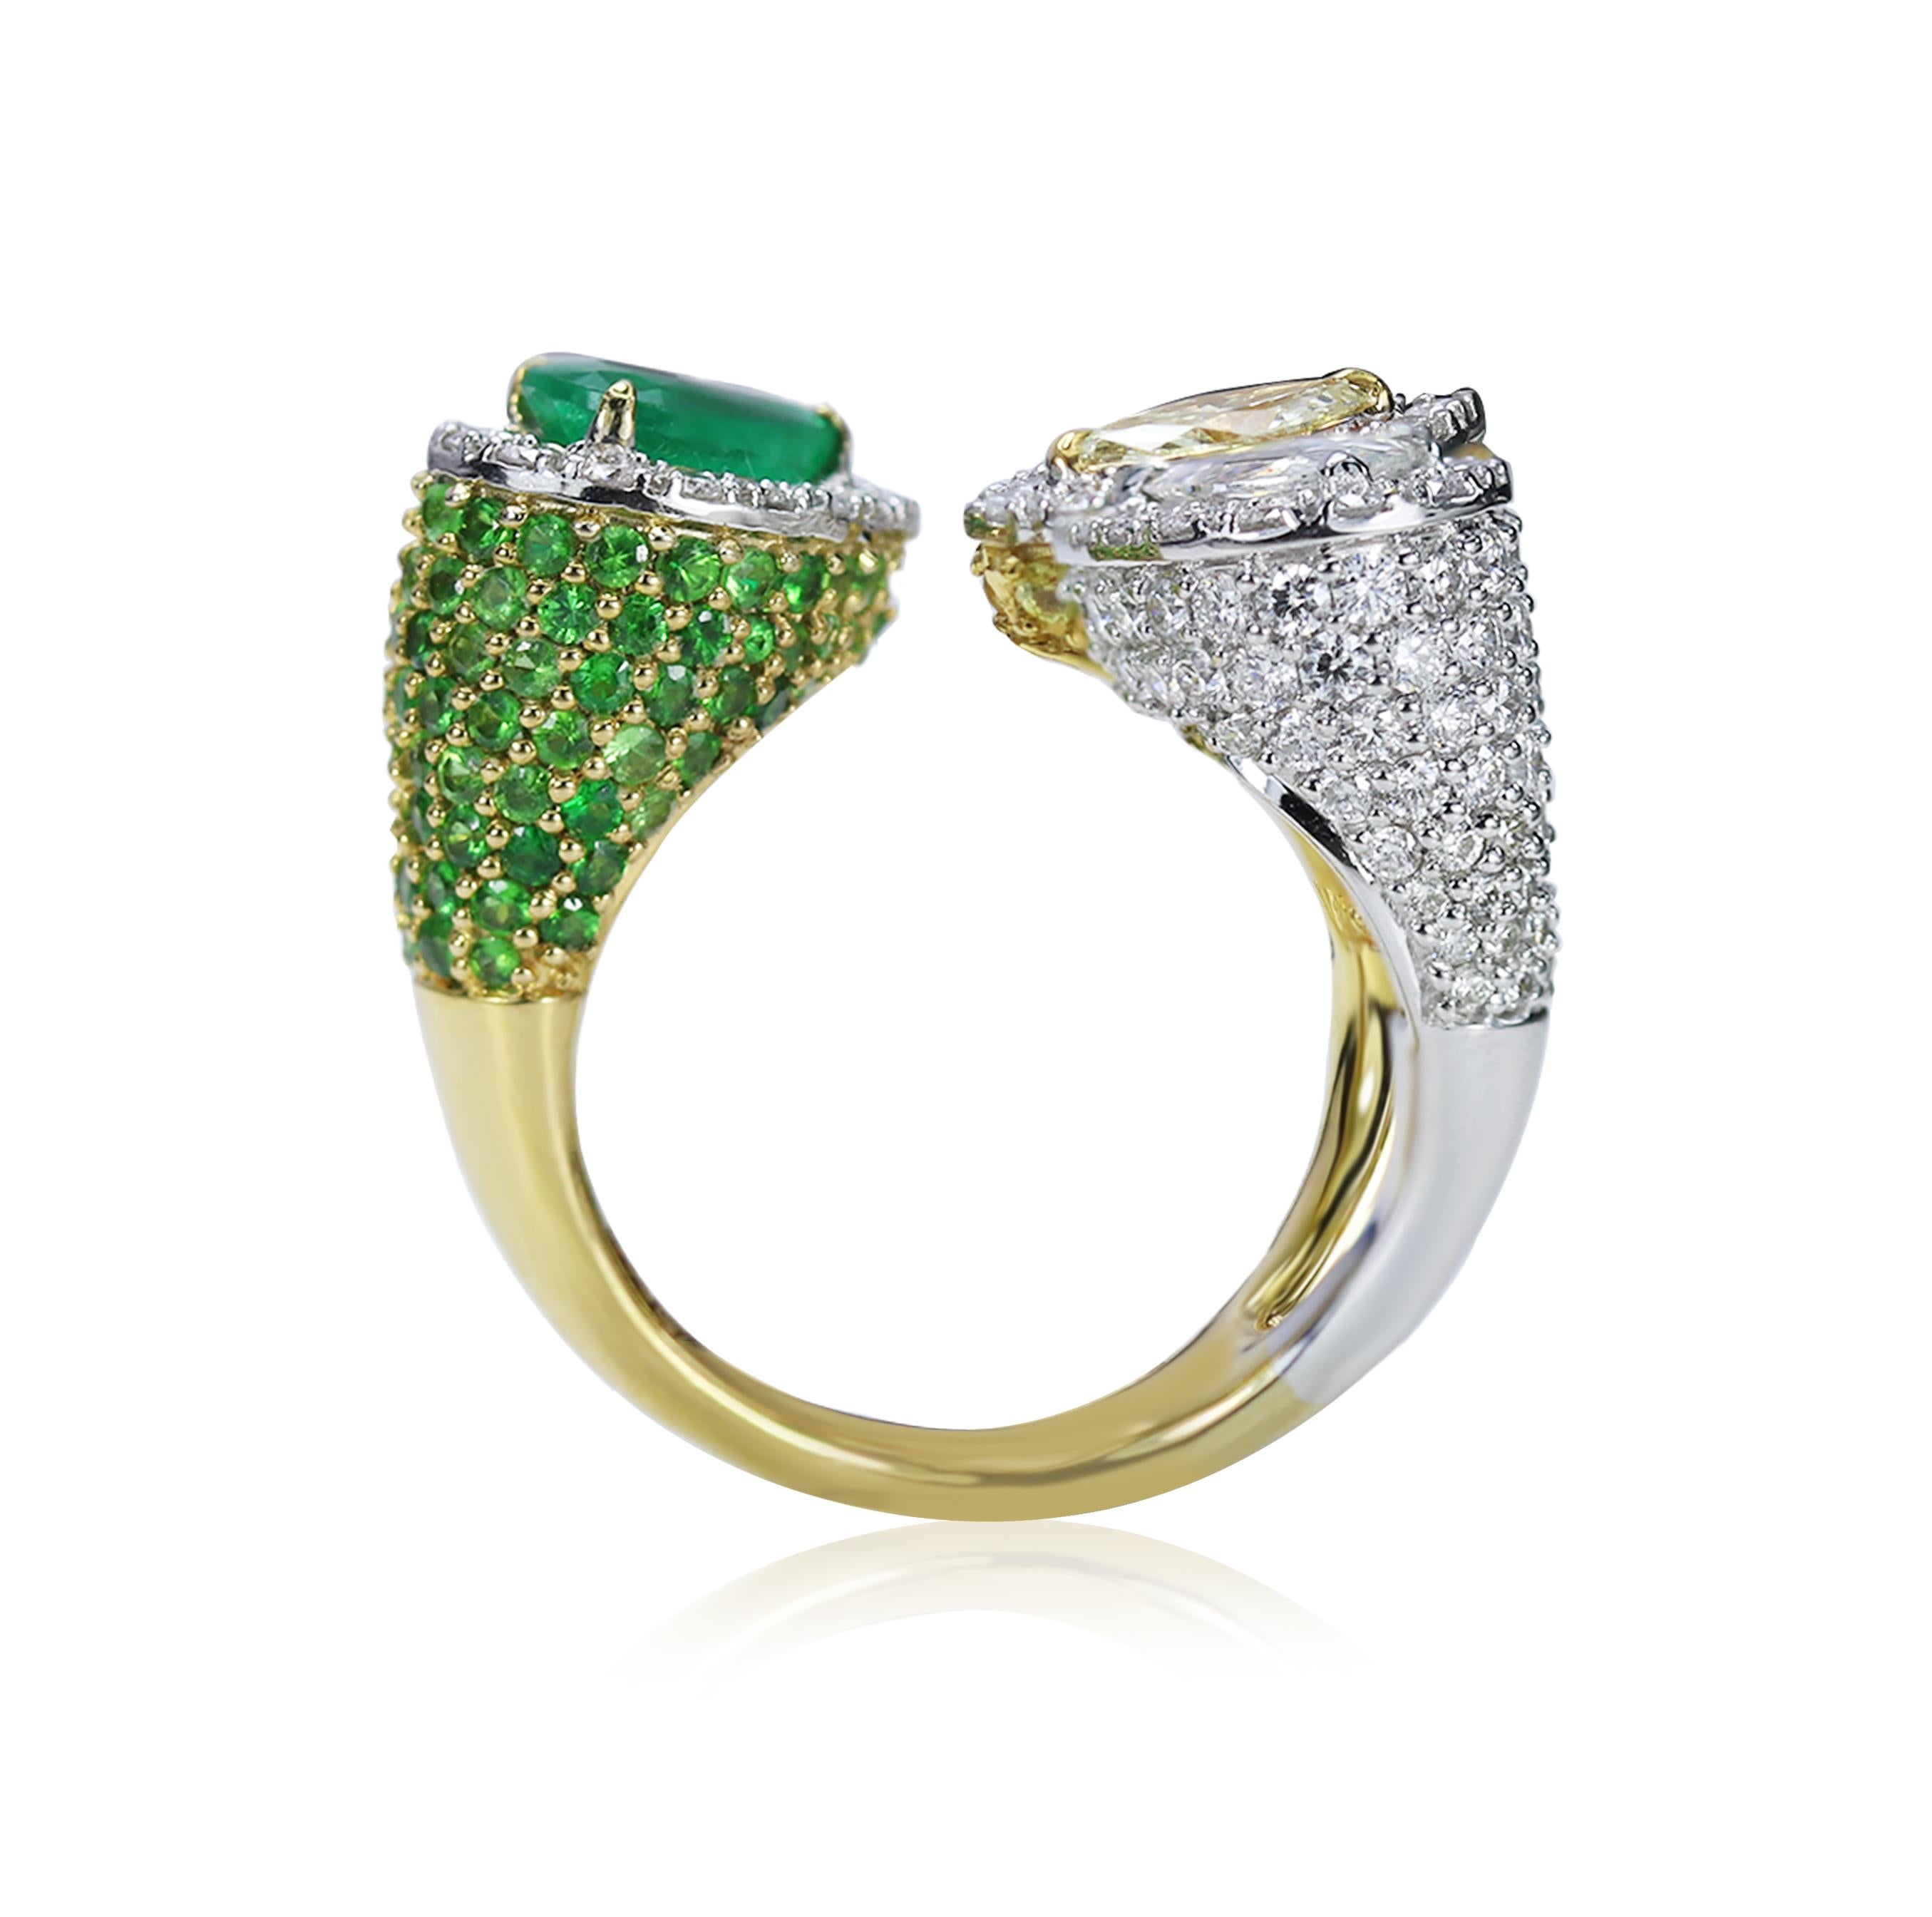 F-G/ SI diamonds, emeralds, tsavorites and yellow sapphire ring 

The canvas of lush foliage-inspired hues, and the use of scintillating F-G/ SI diamonds, emeralds, tsavorites and yellow sapphires give this ring its captivating quality. Continuing